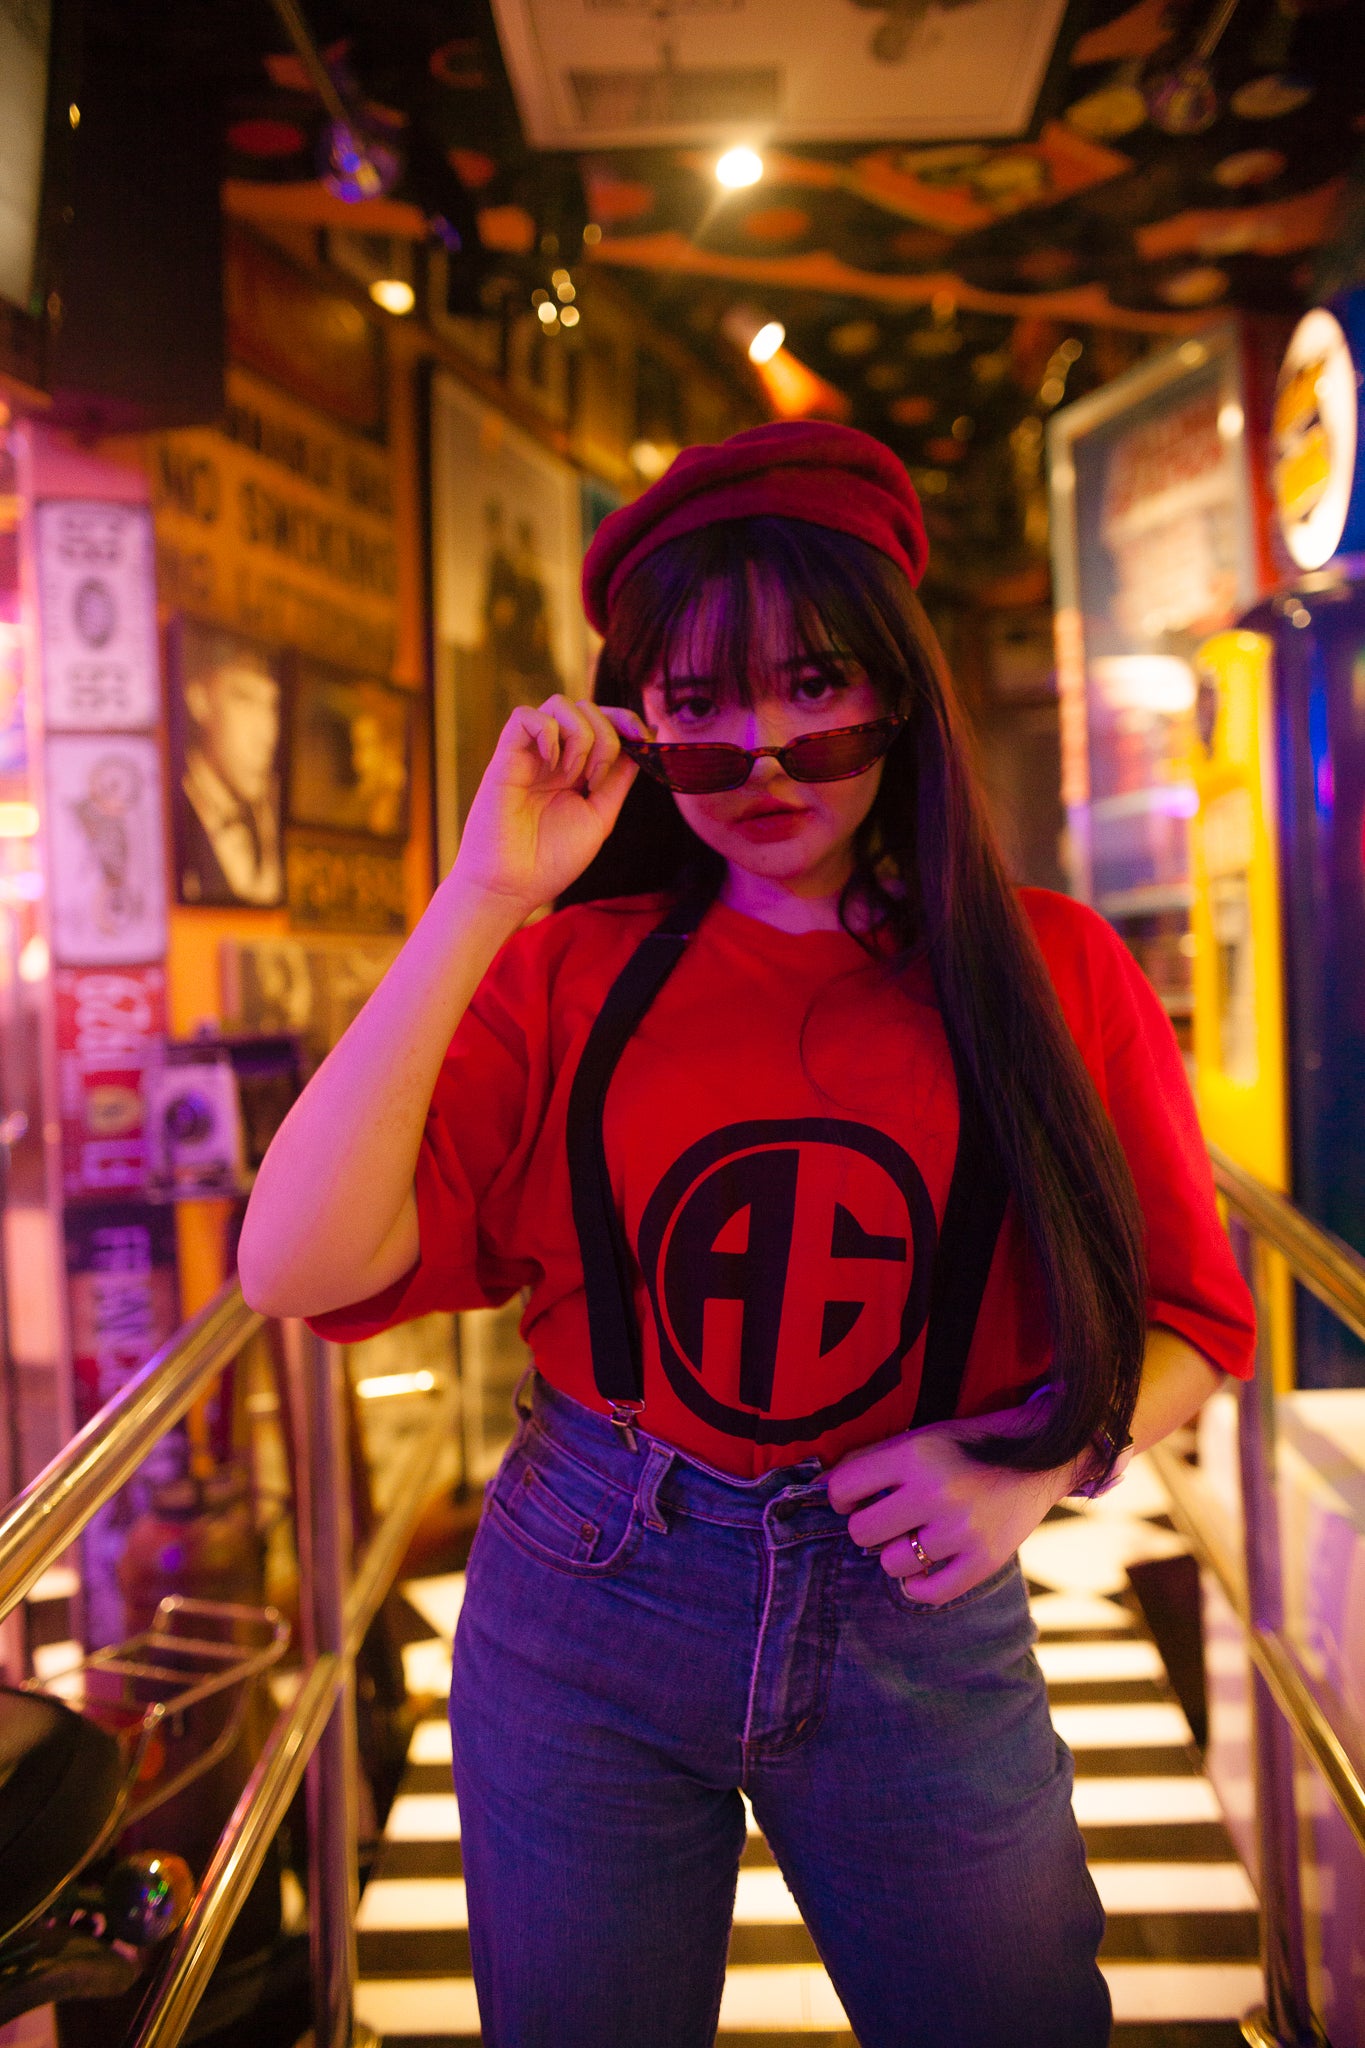 Woman wearing red t-shirt and suspenders